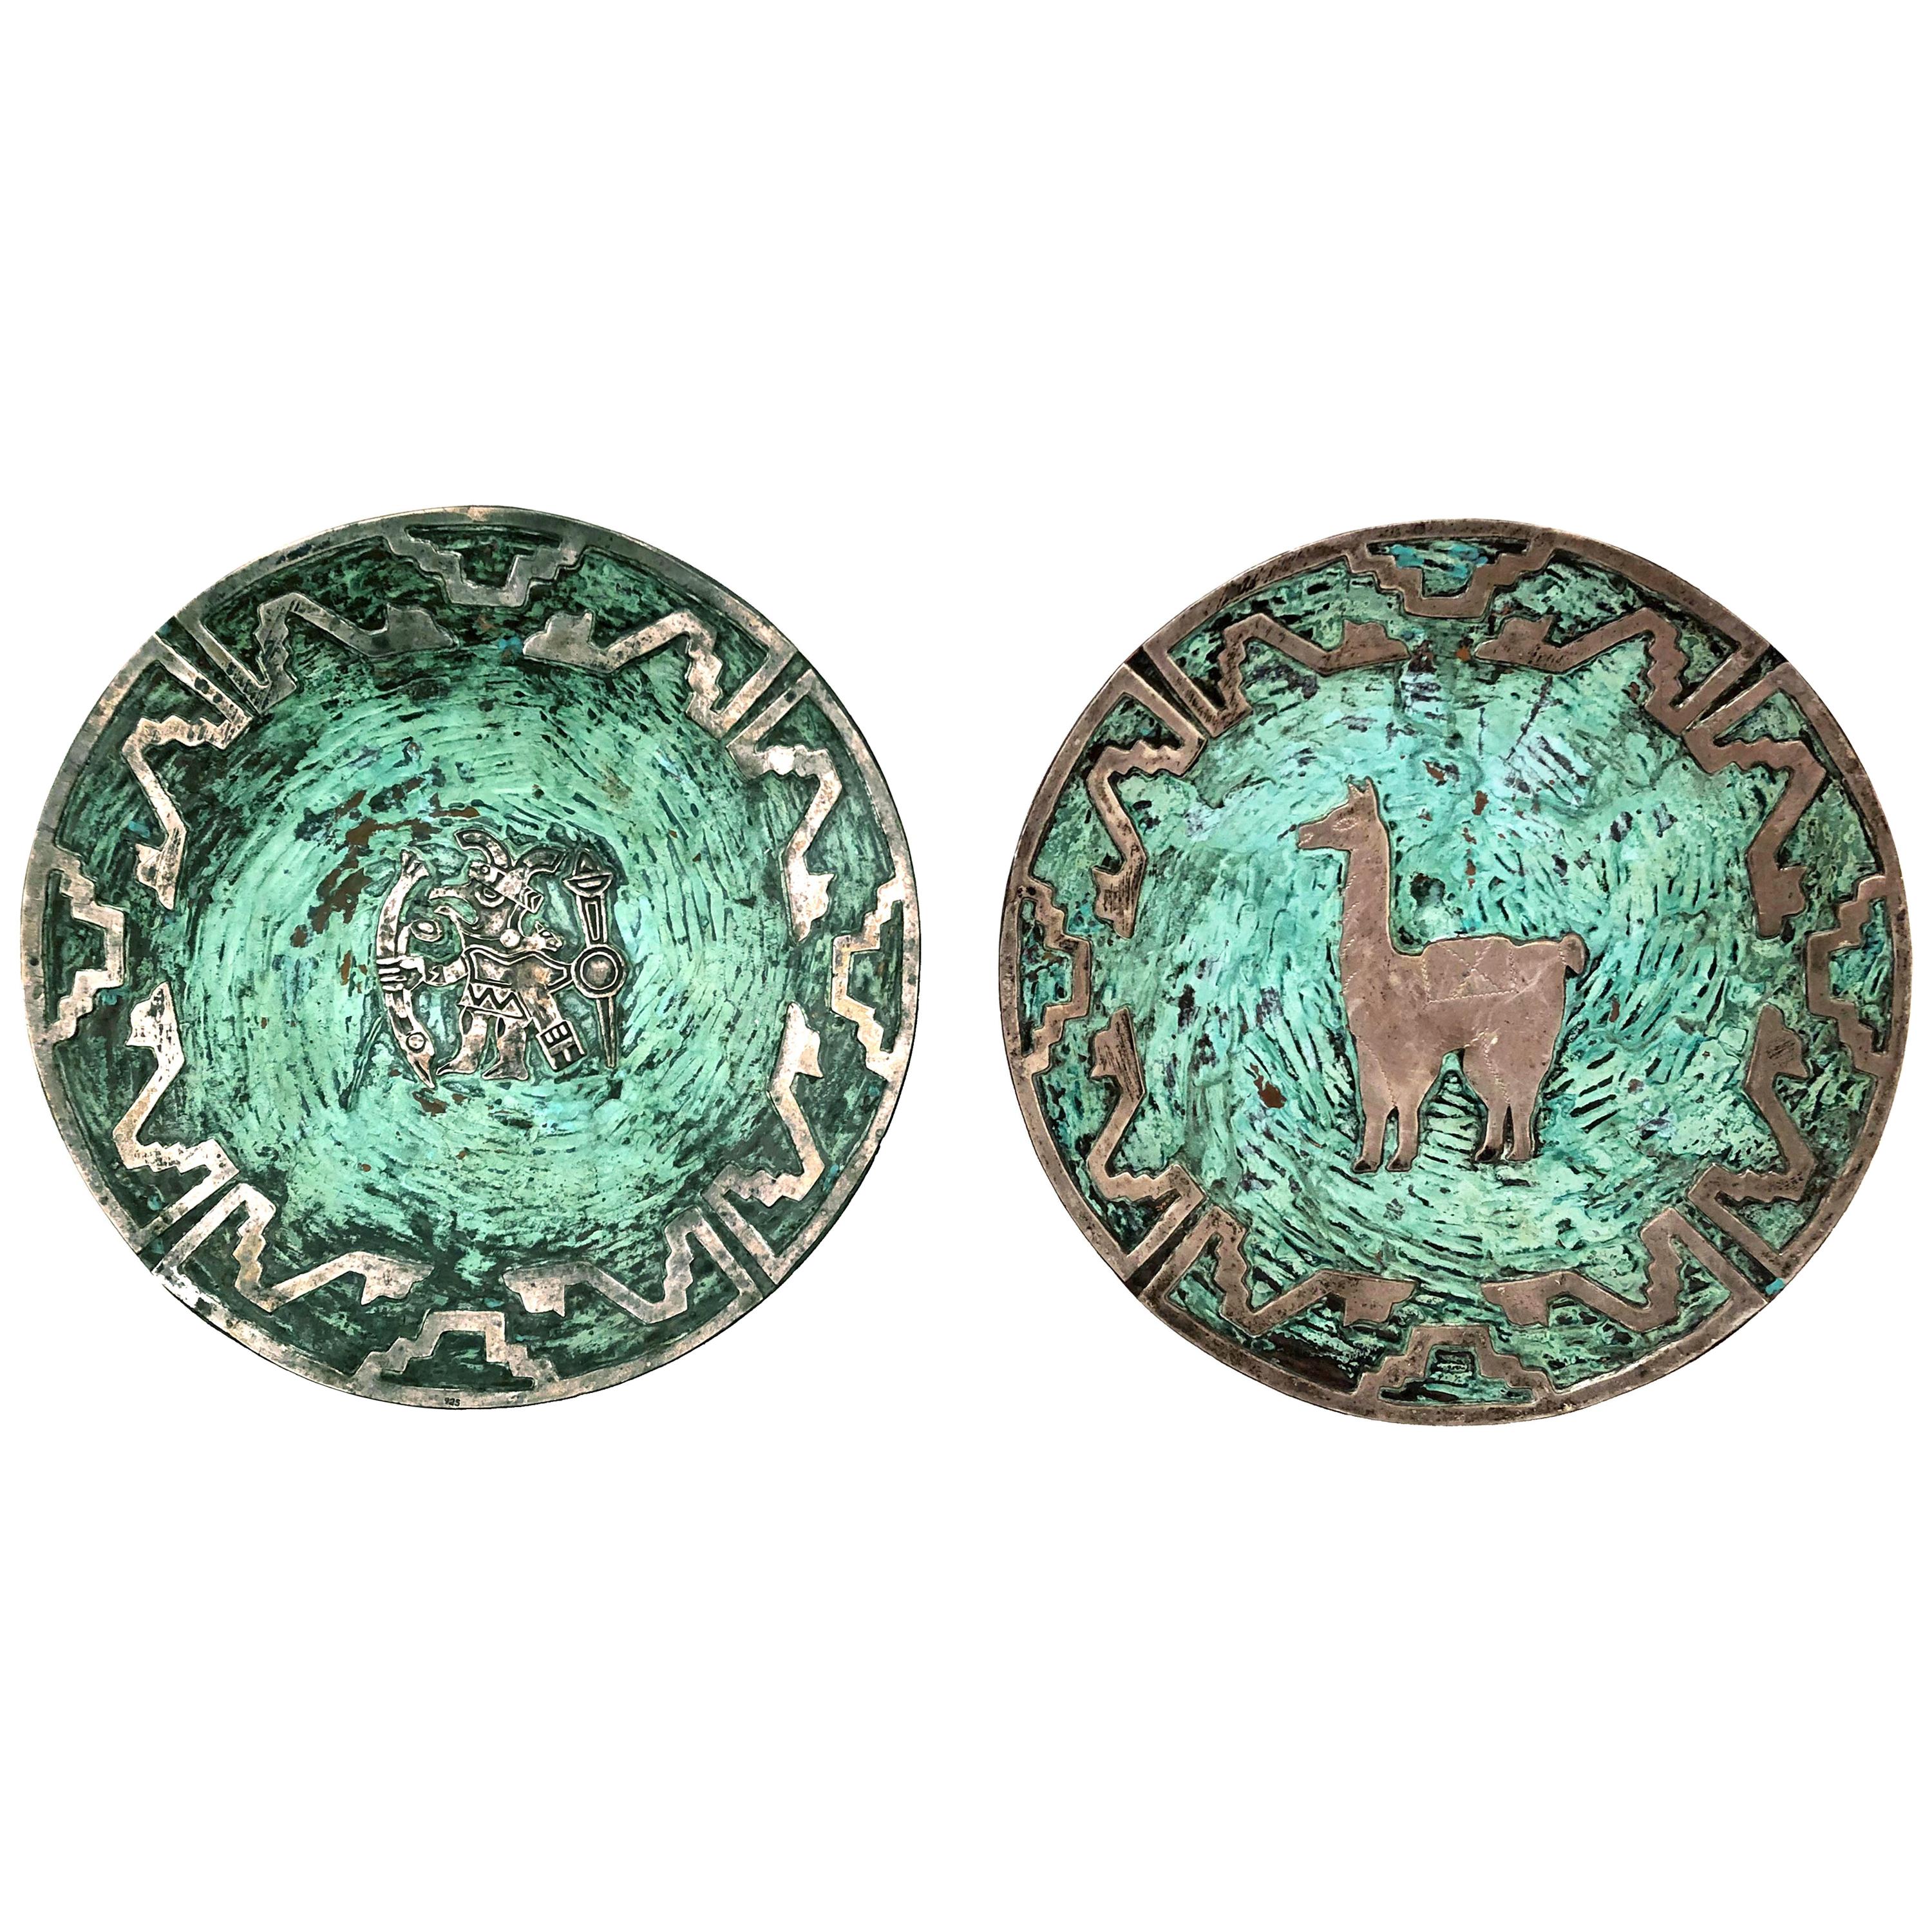 Pair of Silver and Turquoise on Copper Plates Attributed to Graziella Laffi